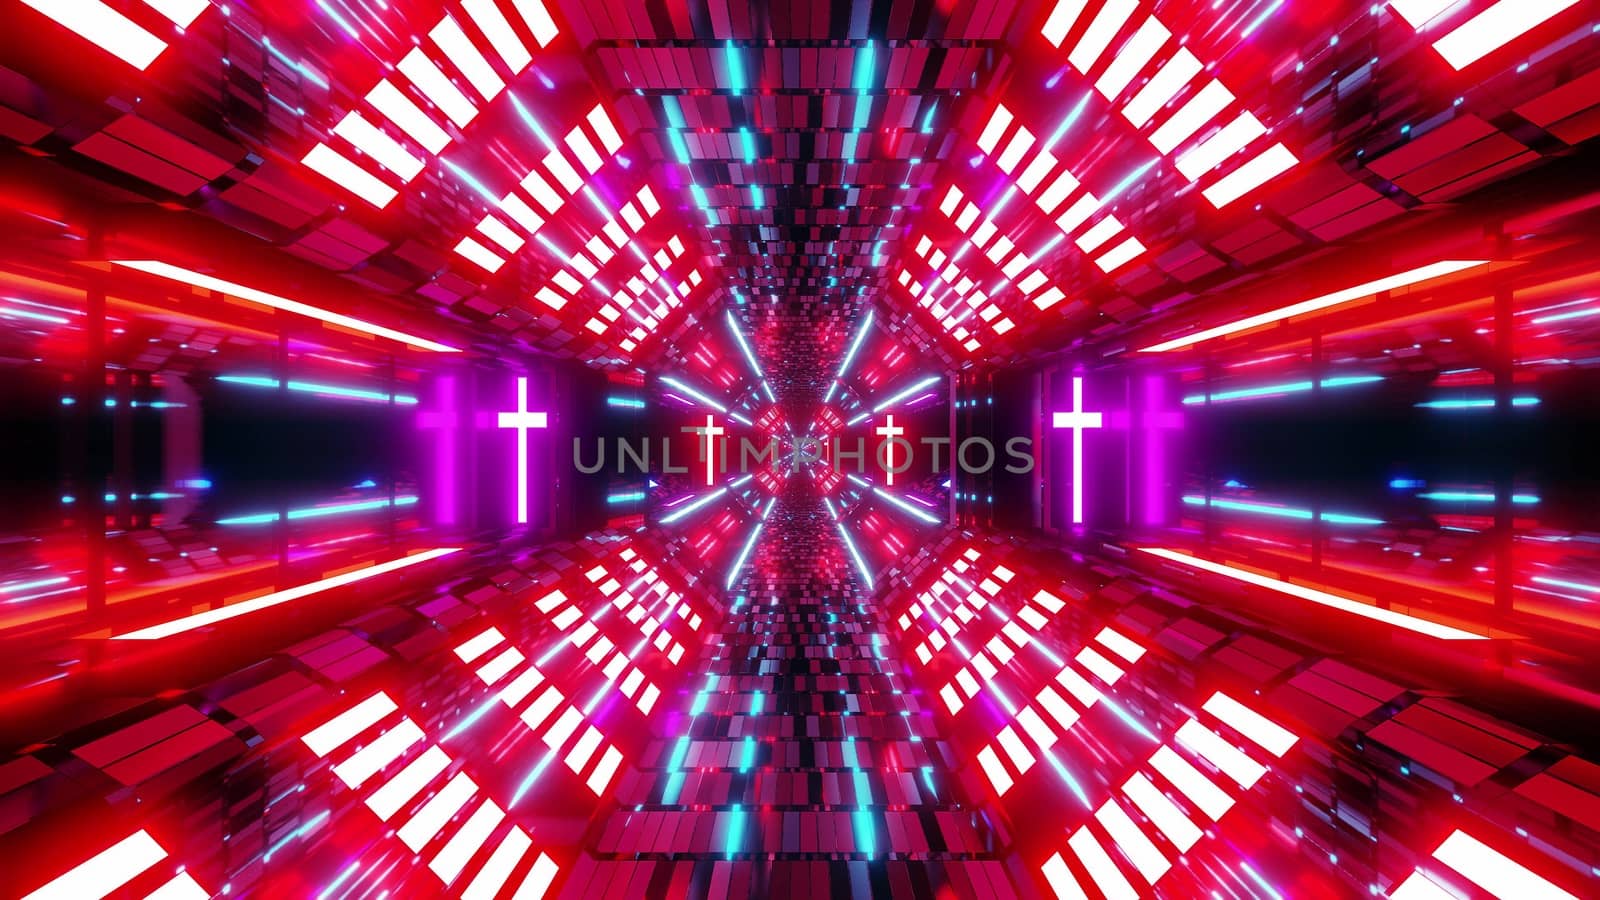 glowing futuristic scifi tunnel corridor with holy glowing christian cross symbol 3d illustration background wallpaper by tunnelmotions